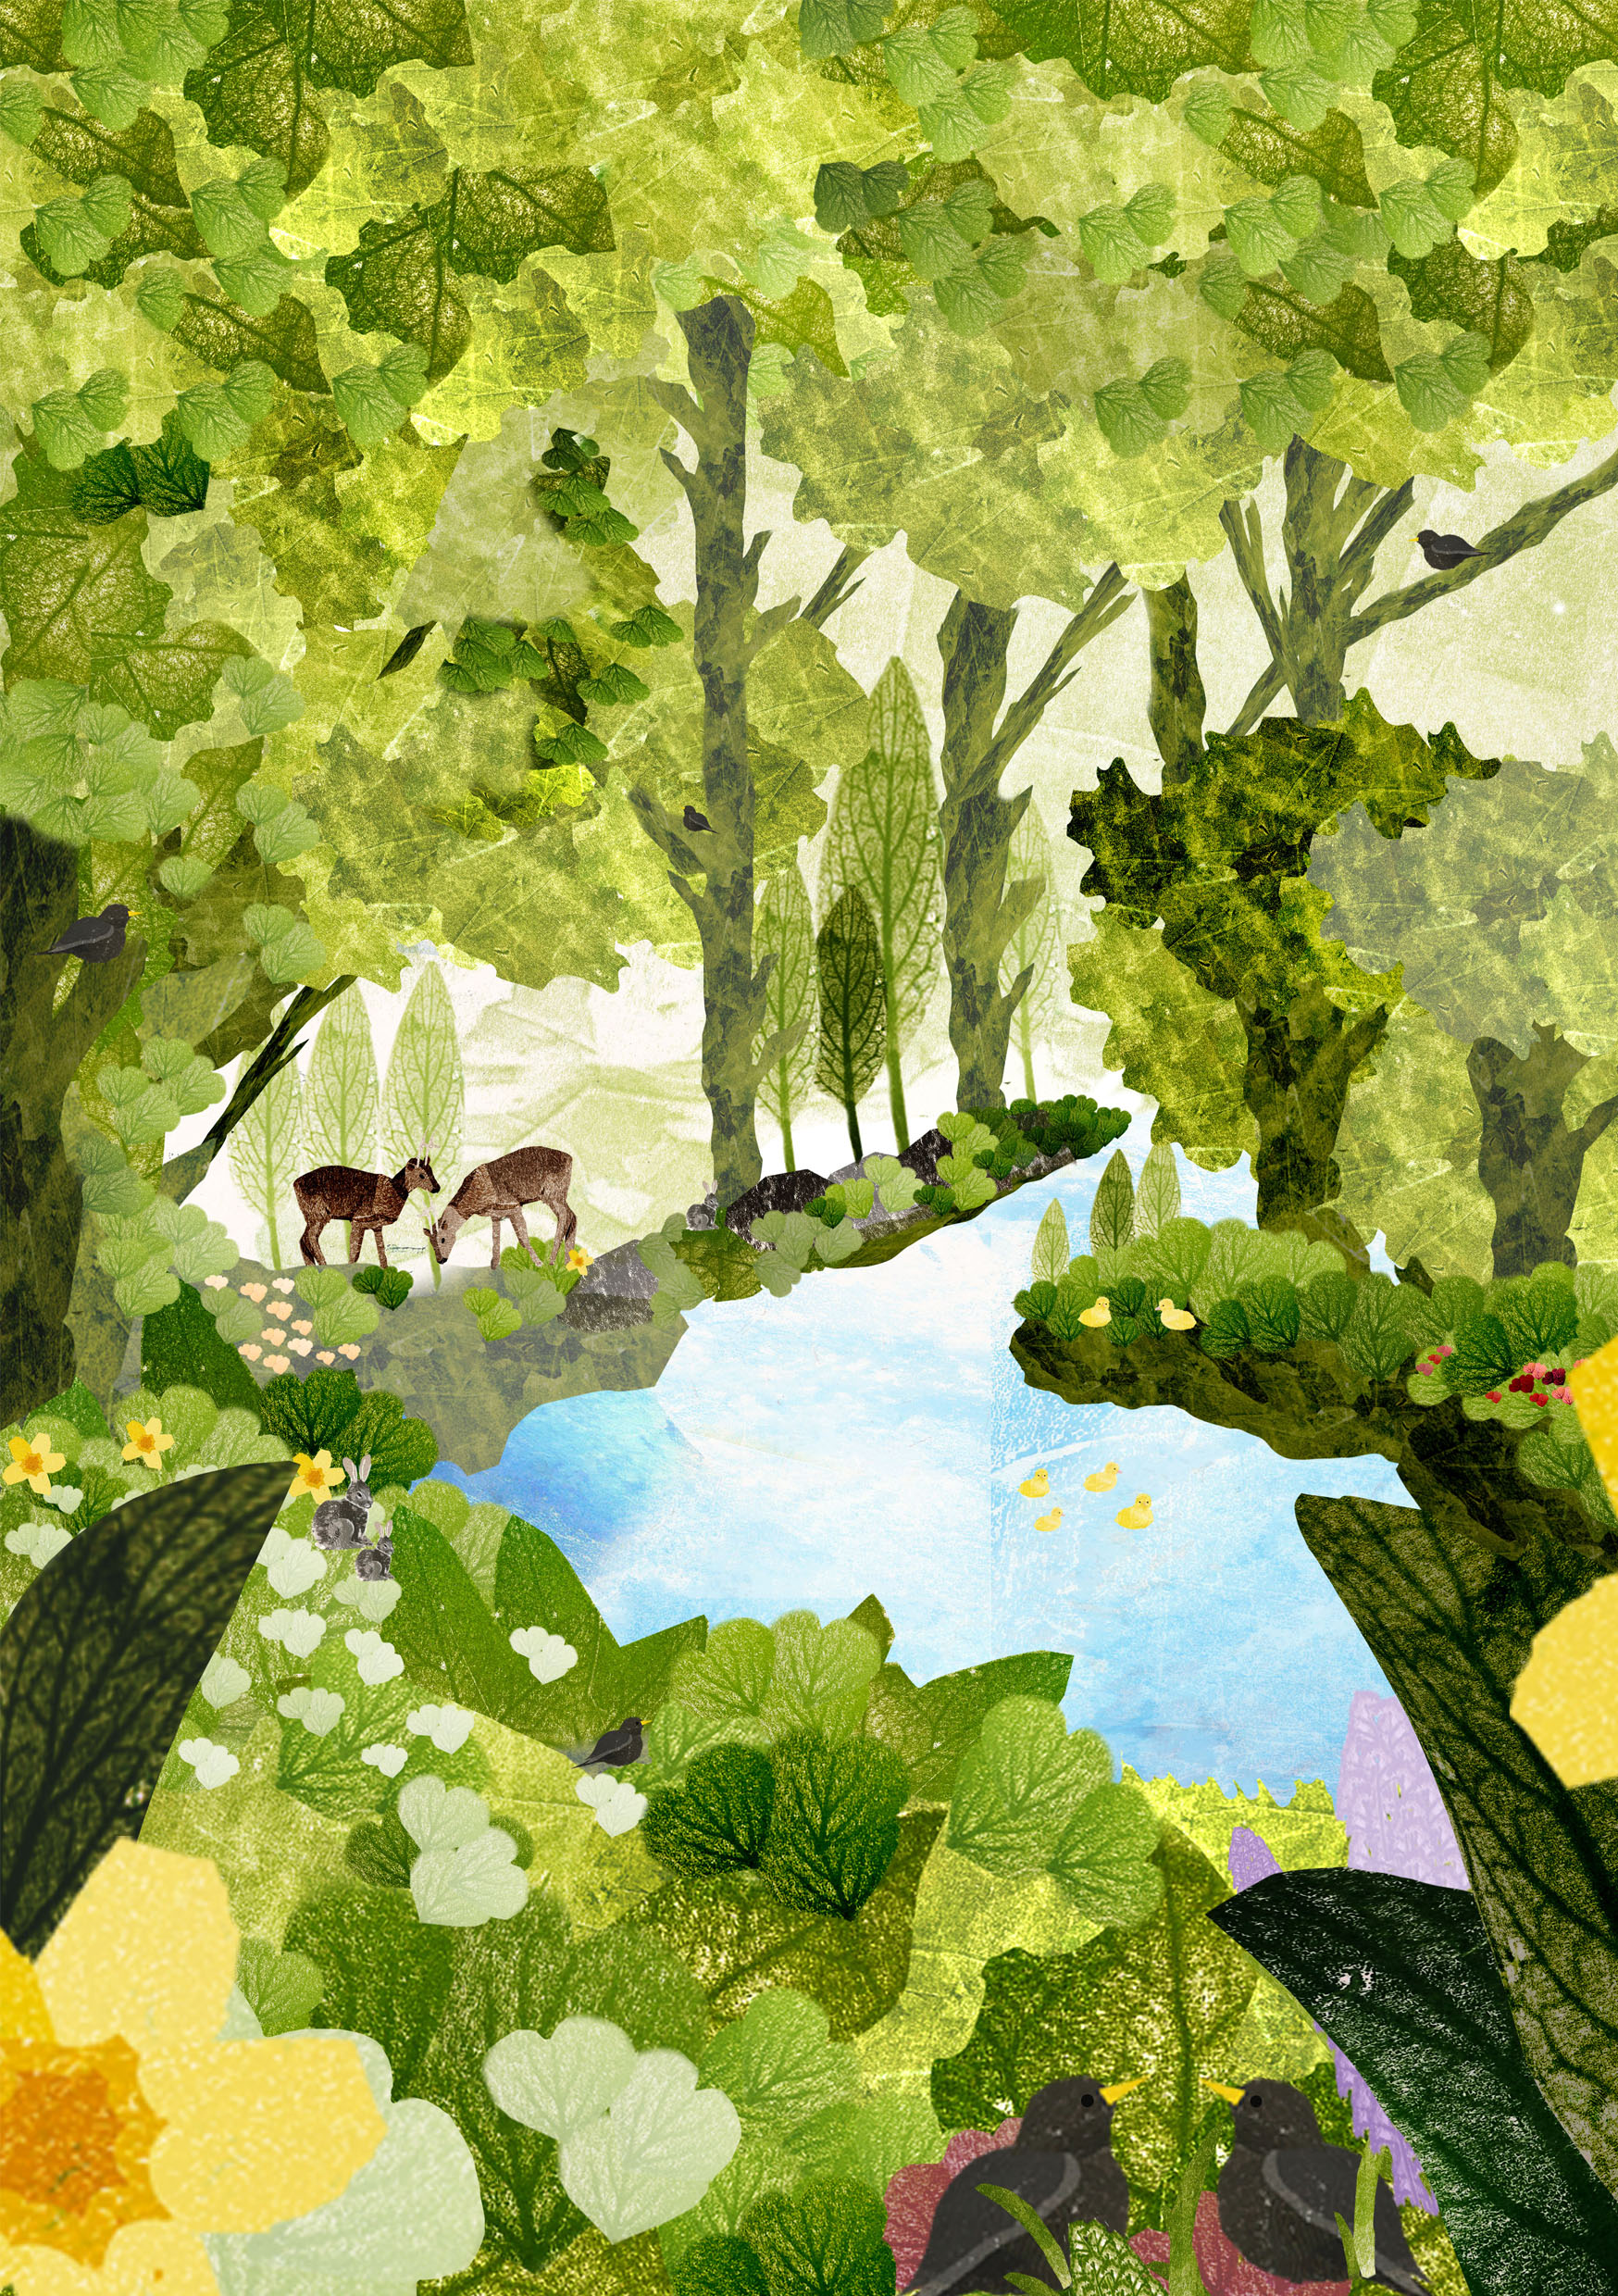 Illustration of a peaceful forest scene by Isabella Howard.